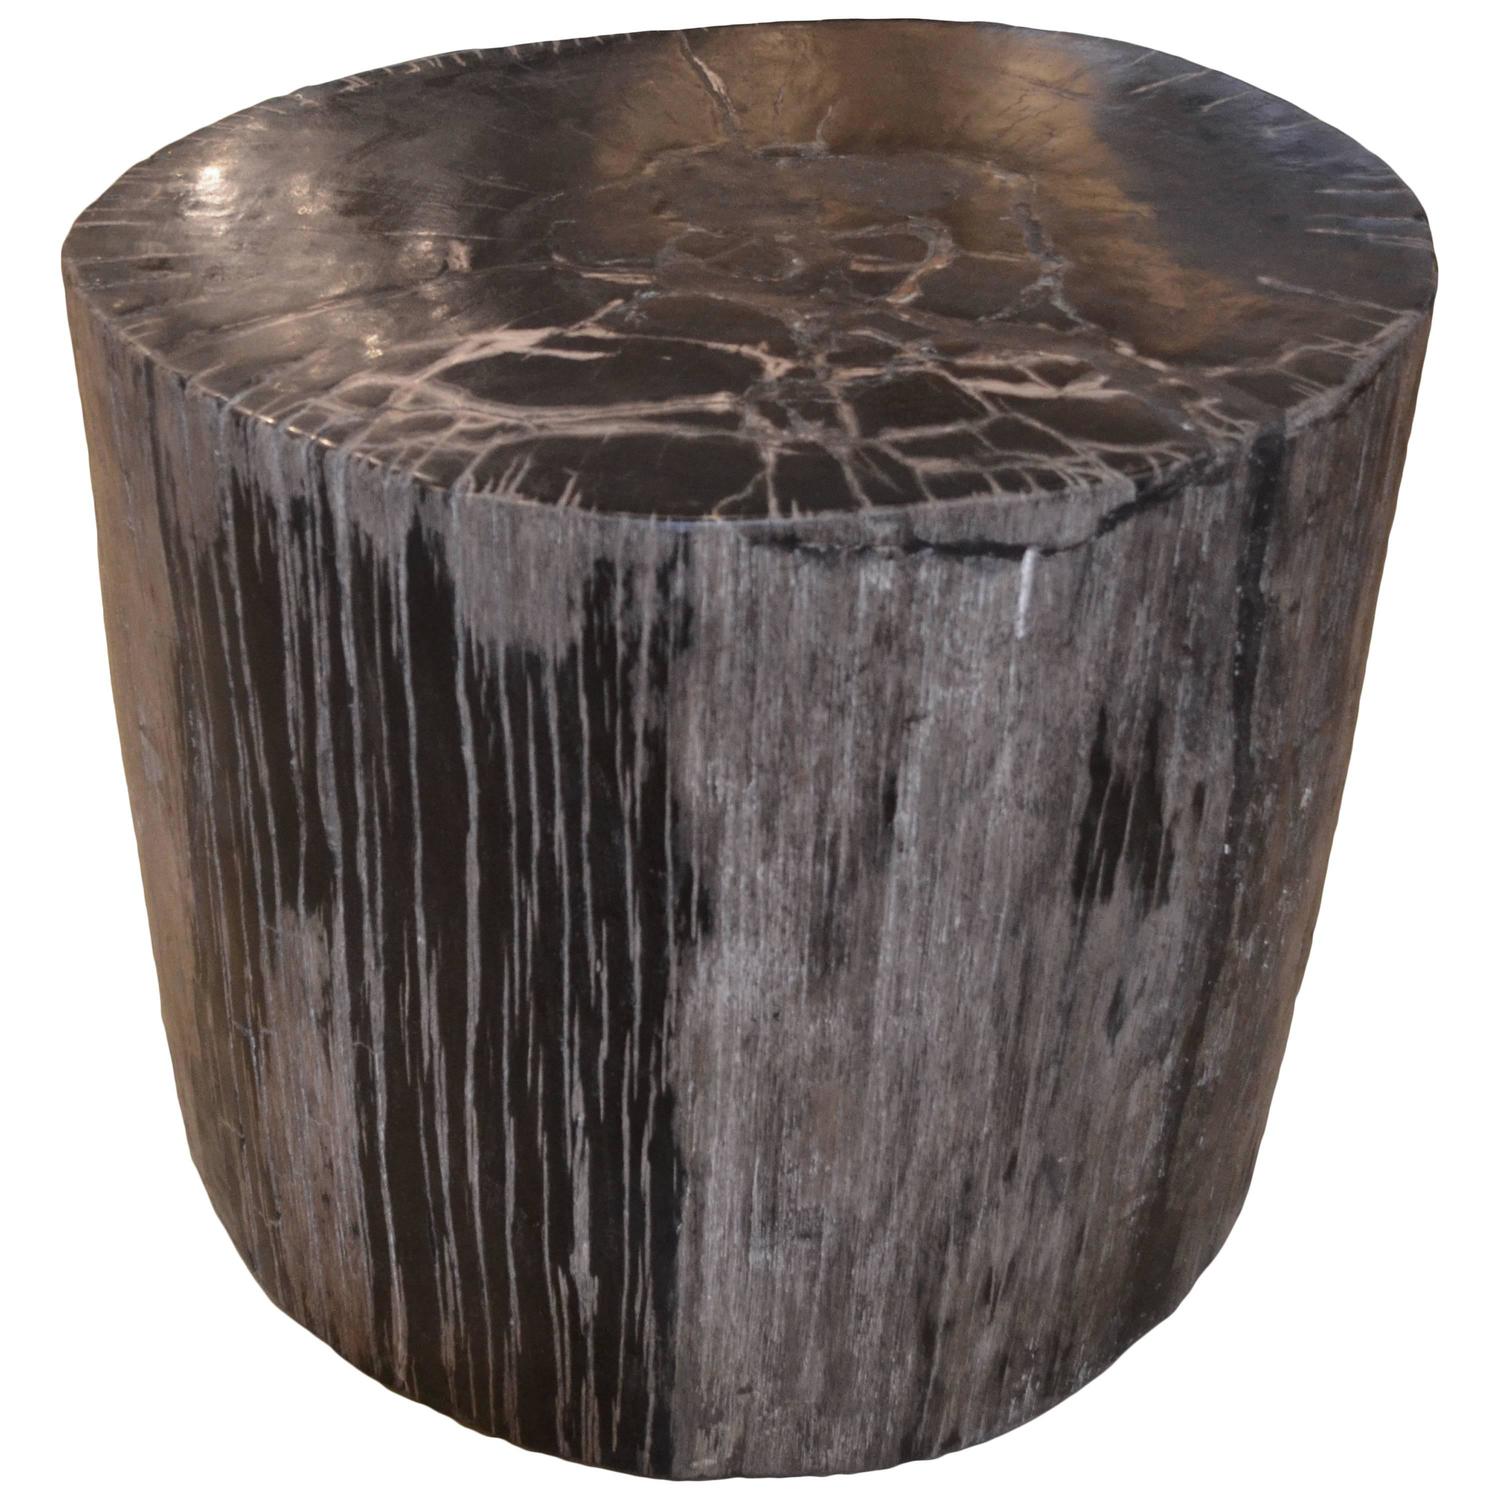 Petrified Wood Side Table For Sale at 1stdibs